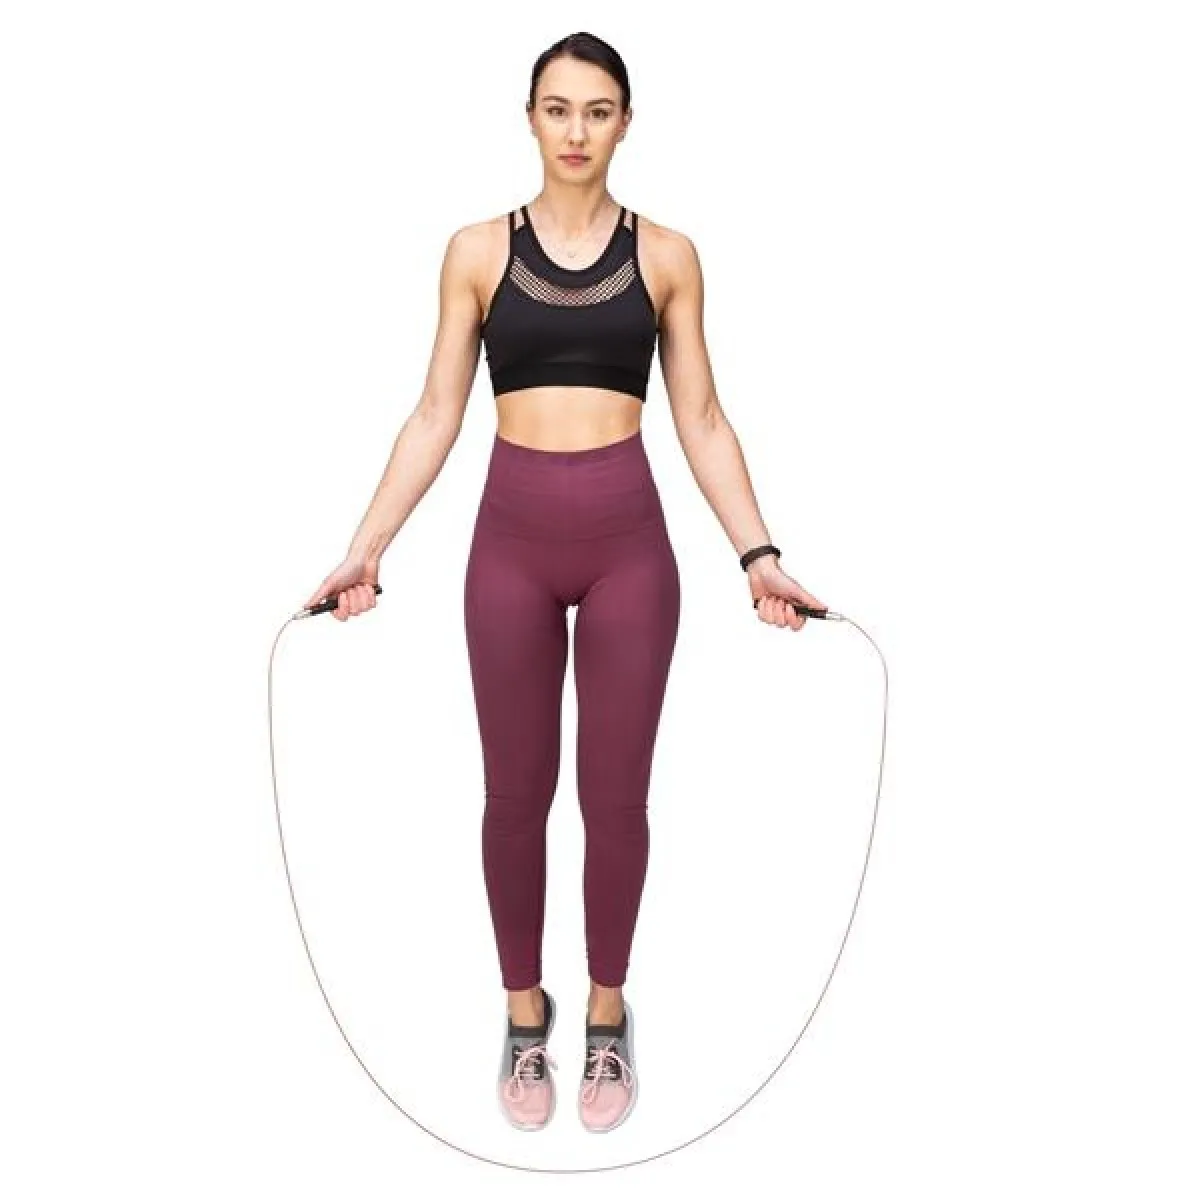 Fast professional skipping rope